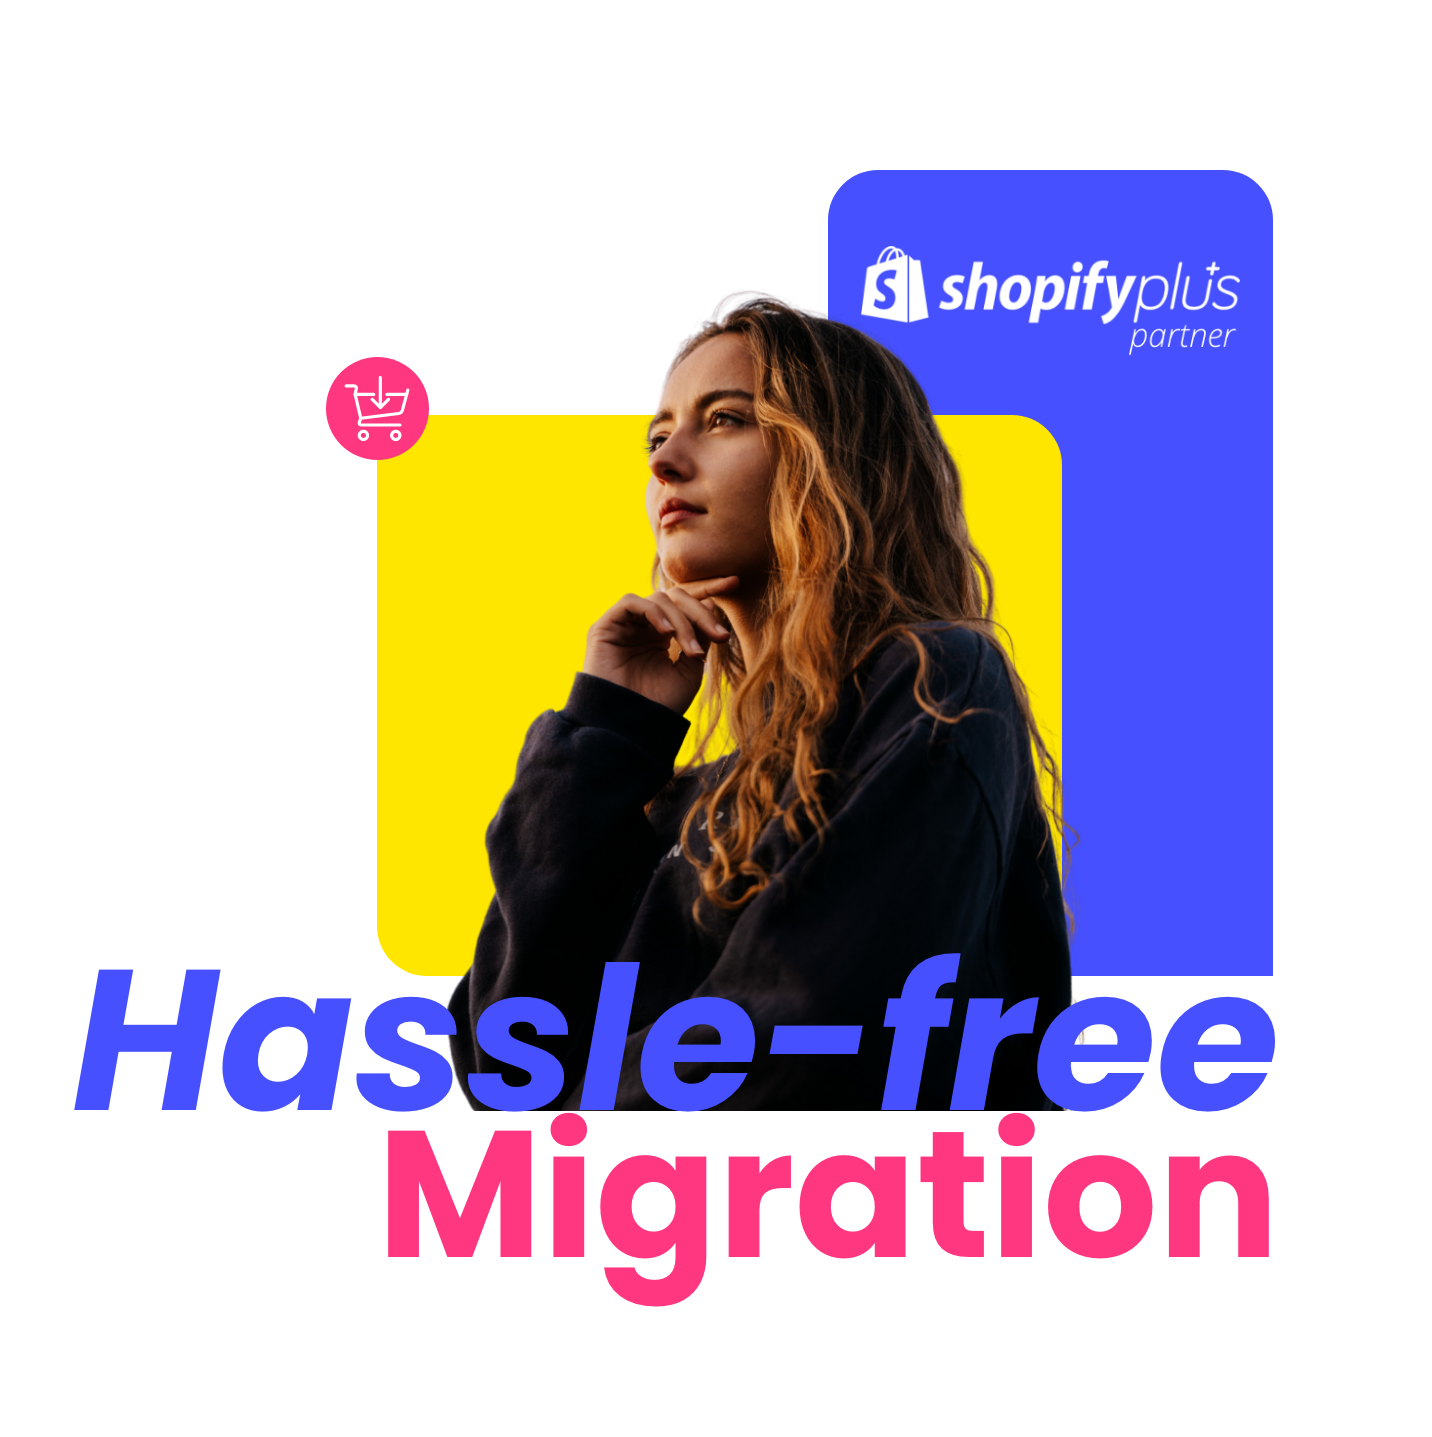 The Hope Factory Shopify Plus partners: hassle free migration to Shopify & Shopify Plus